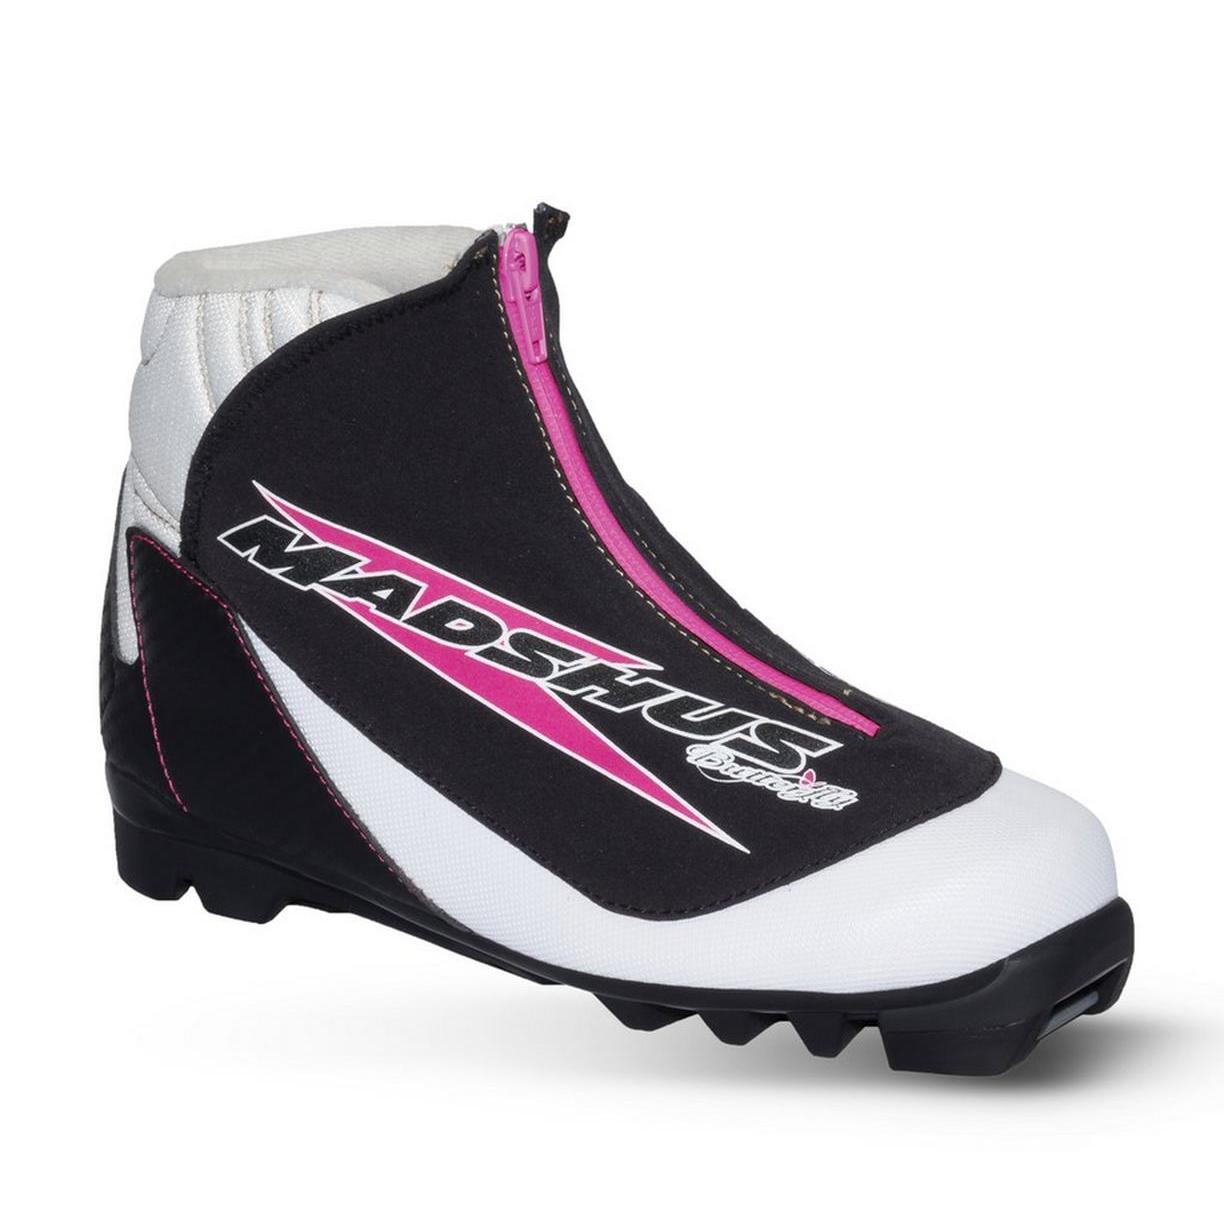 Madshus Butterfly Junior Boot 2021-2022 31